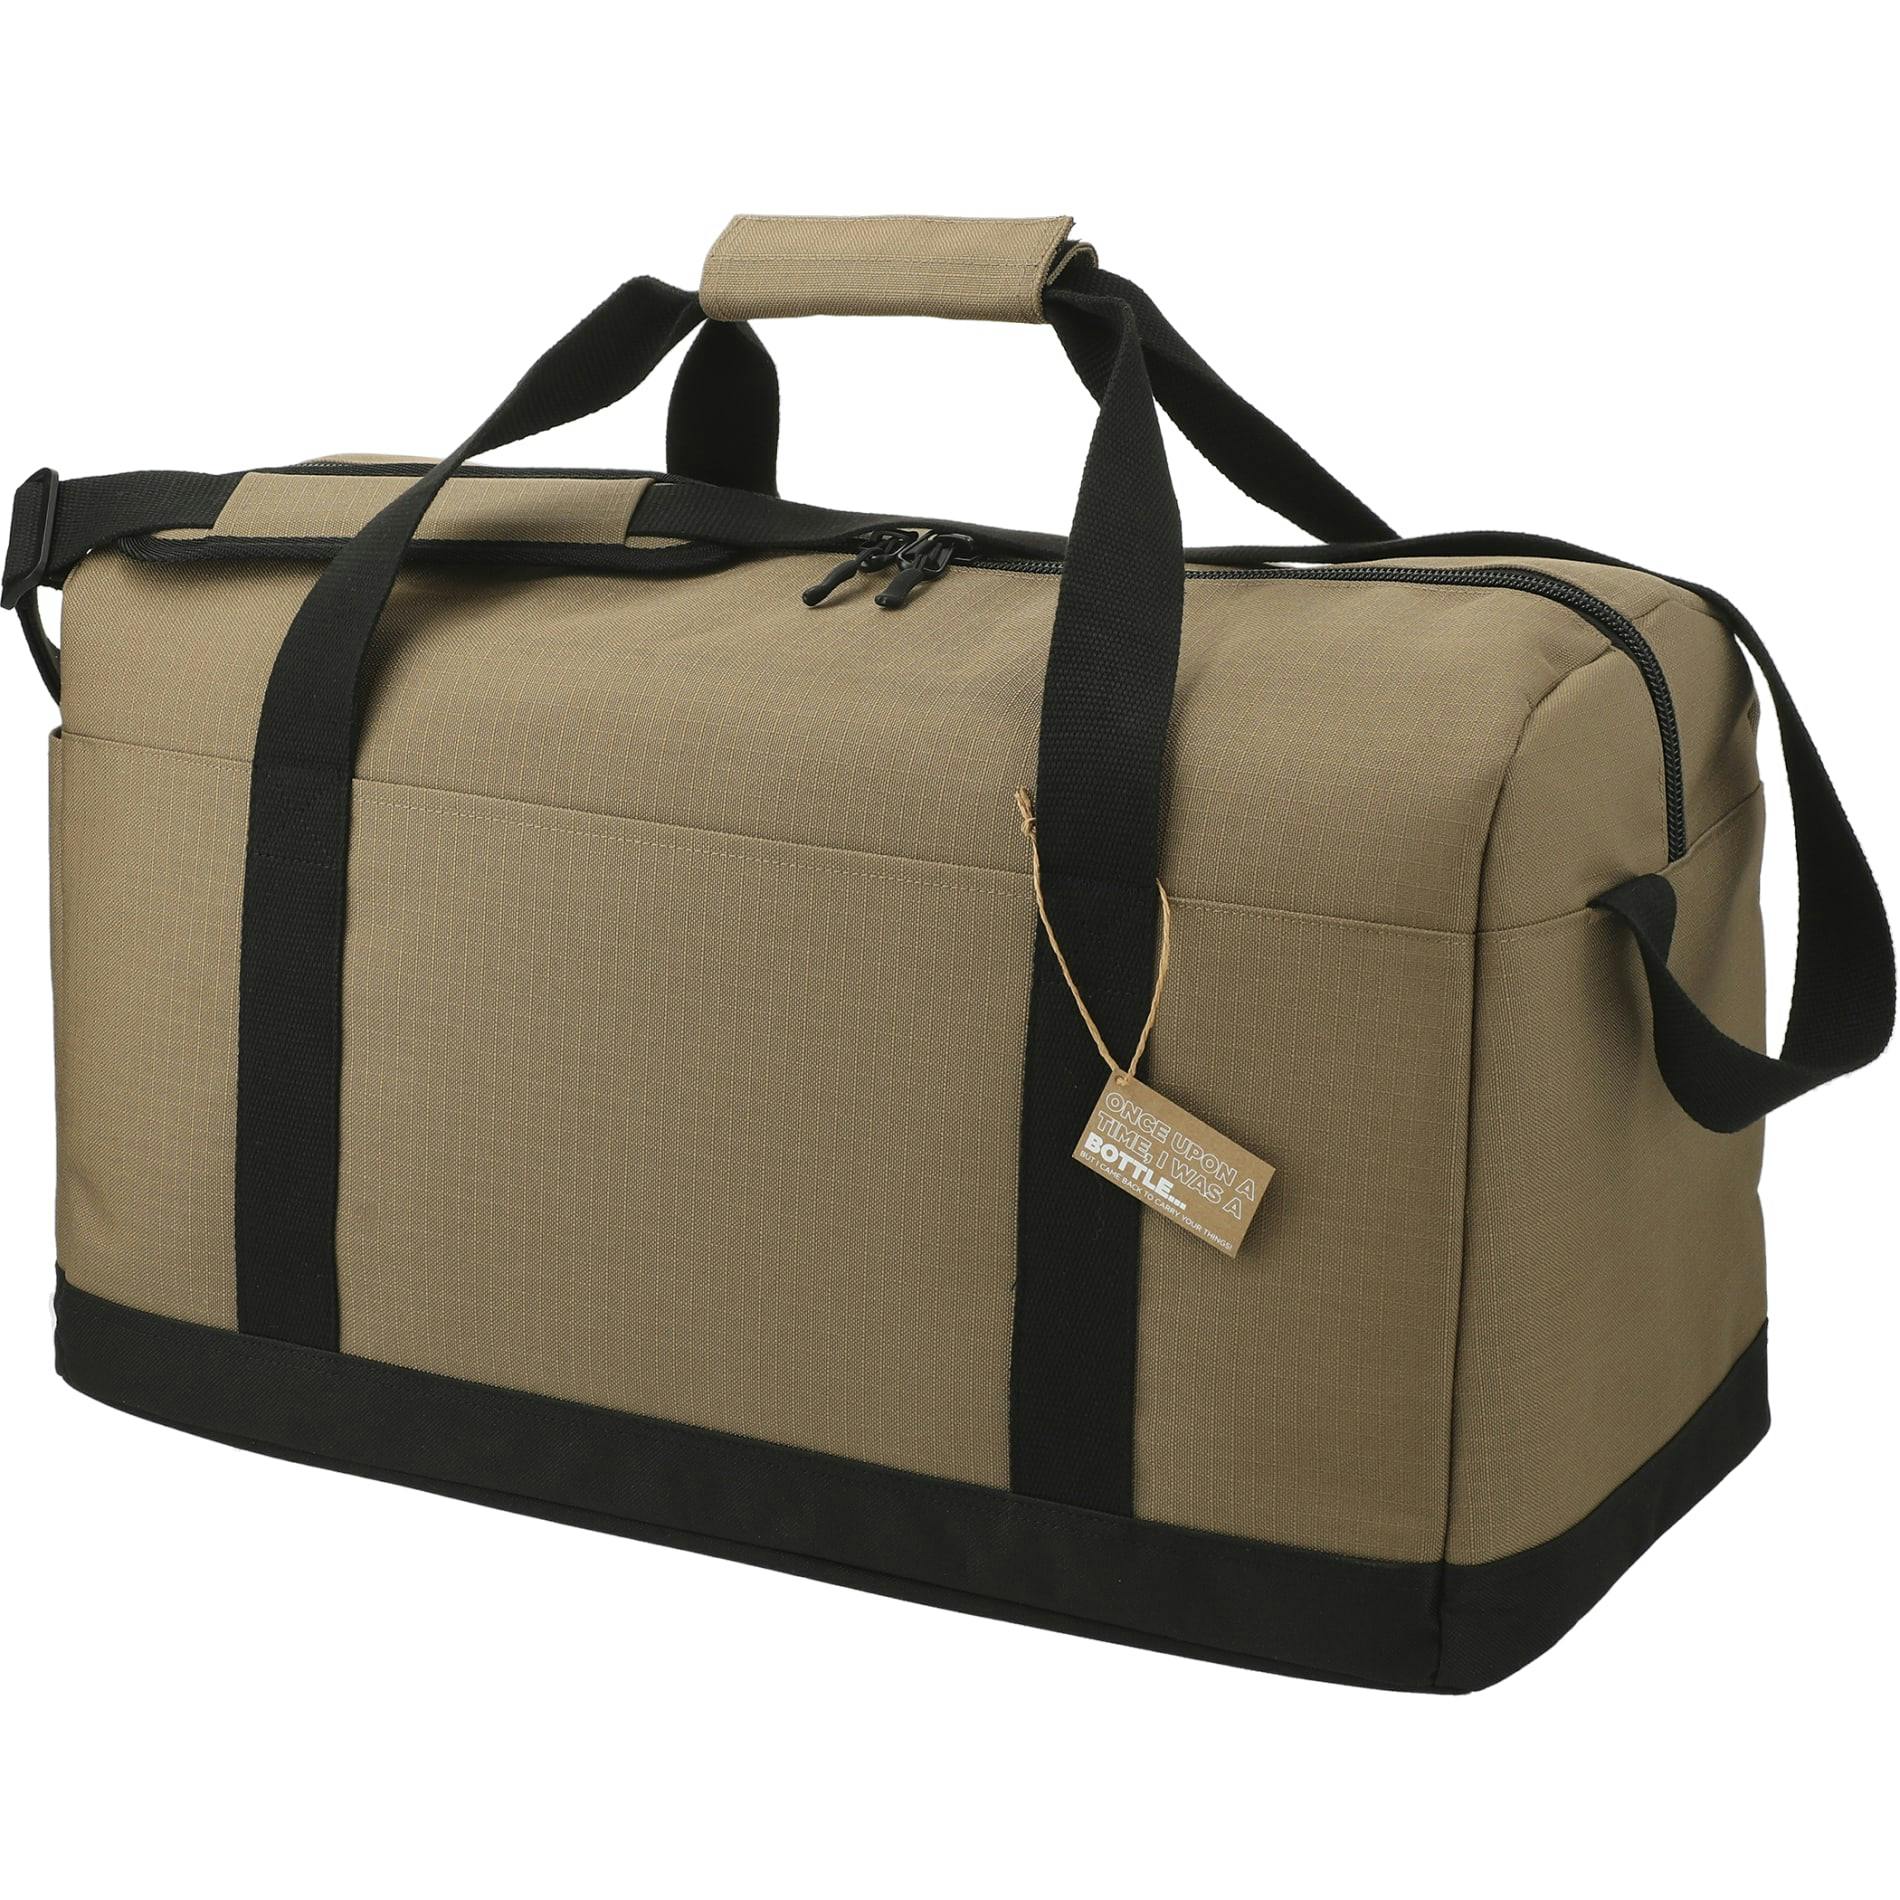 NBN Recycled Utility Duffel - additional Image 1